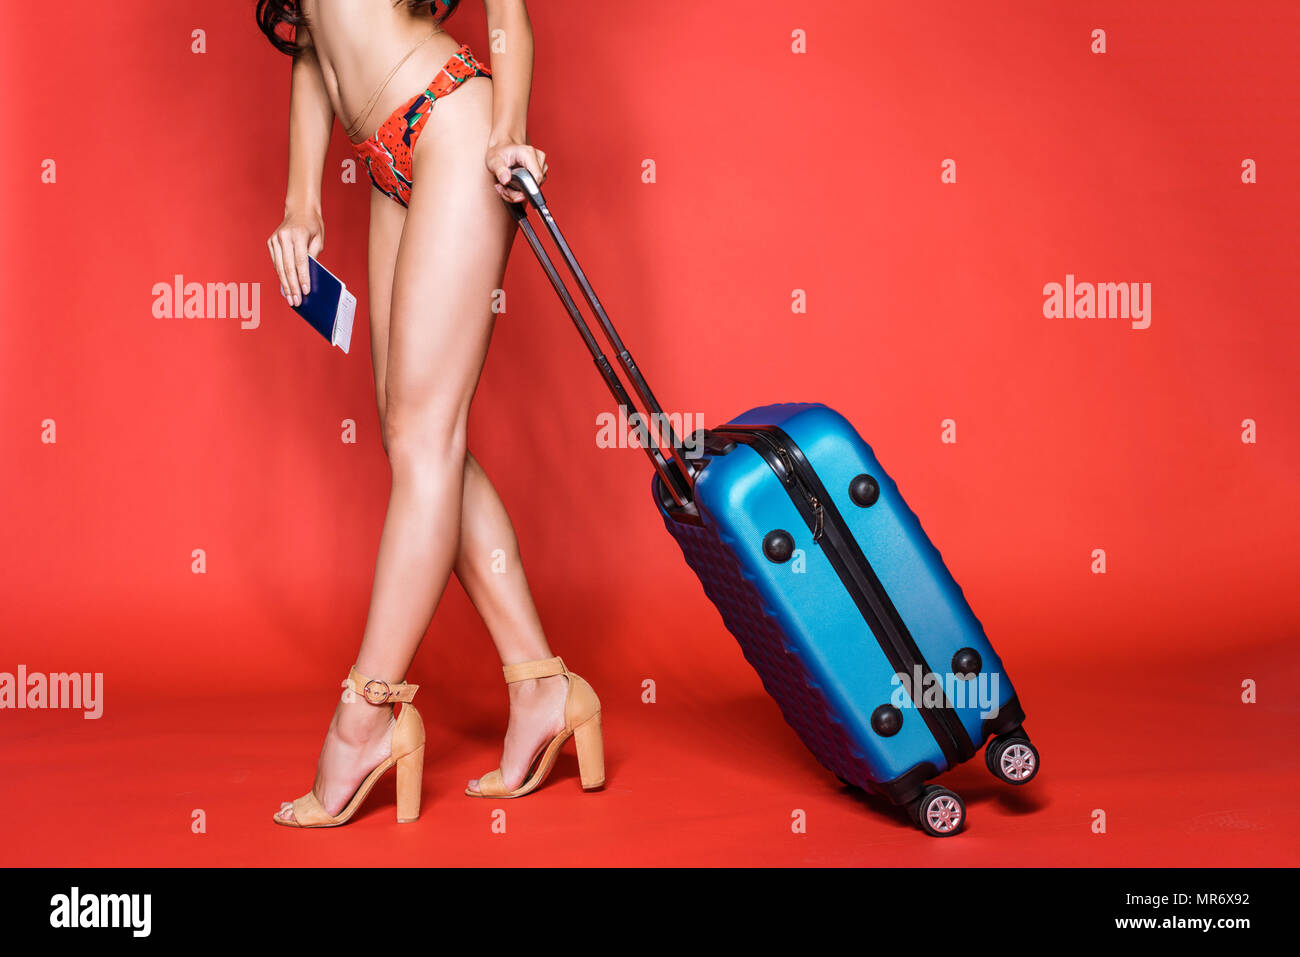 Cropped shot of woman in bright swimsuit and heels, holding a suitcase and airplane tickets Stock Photo